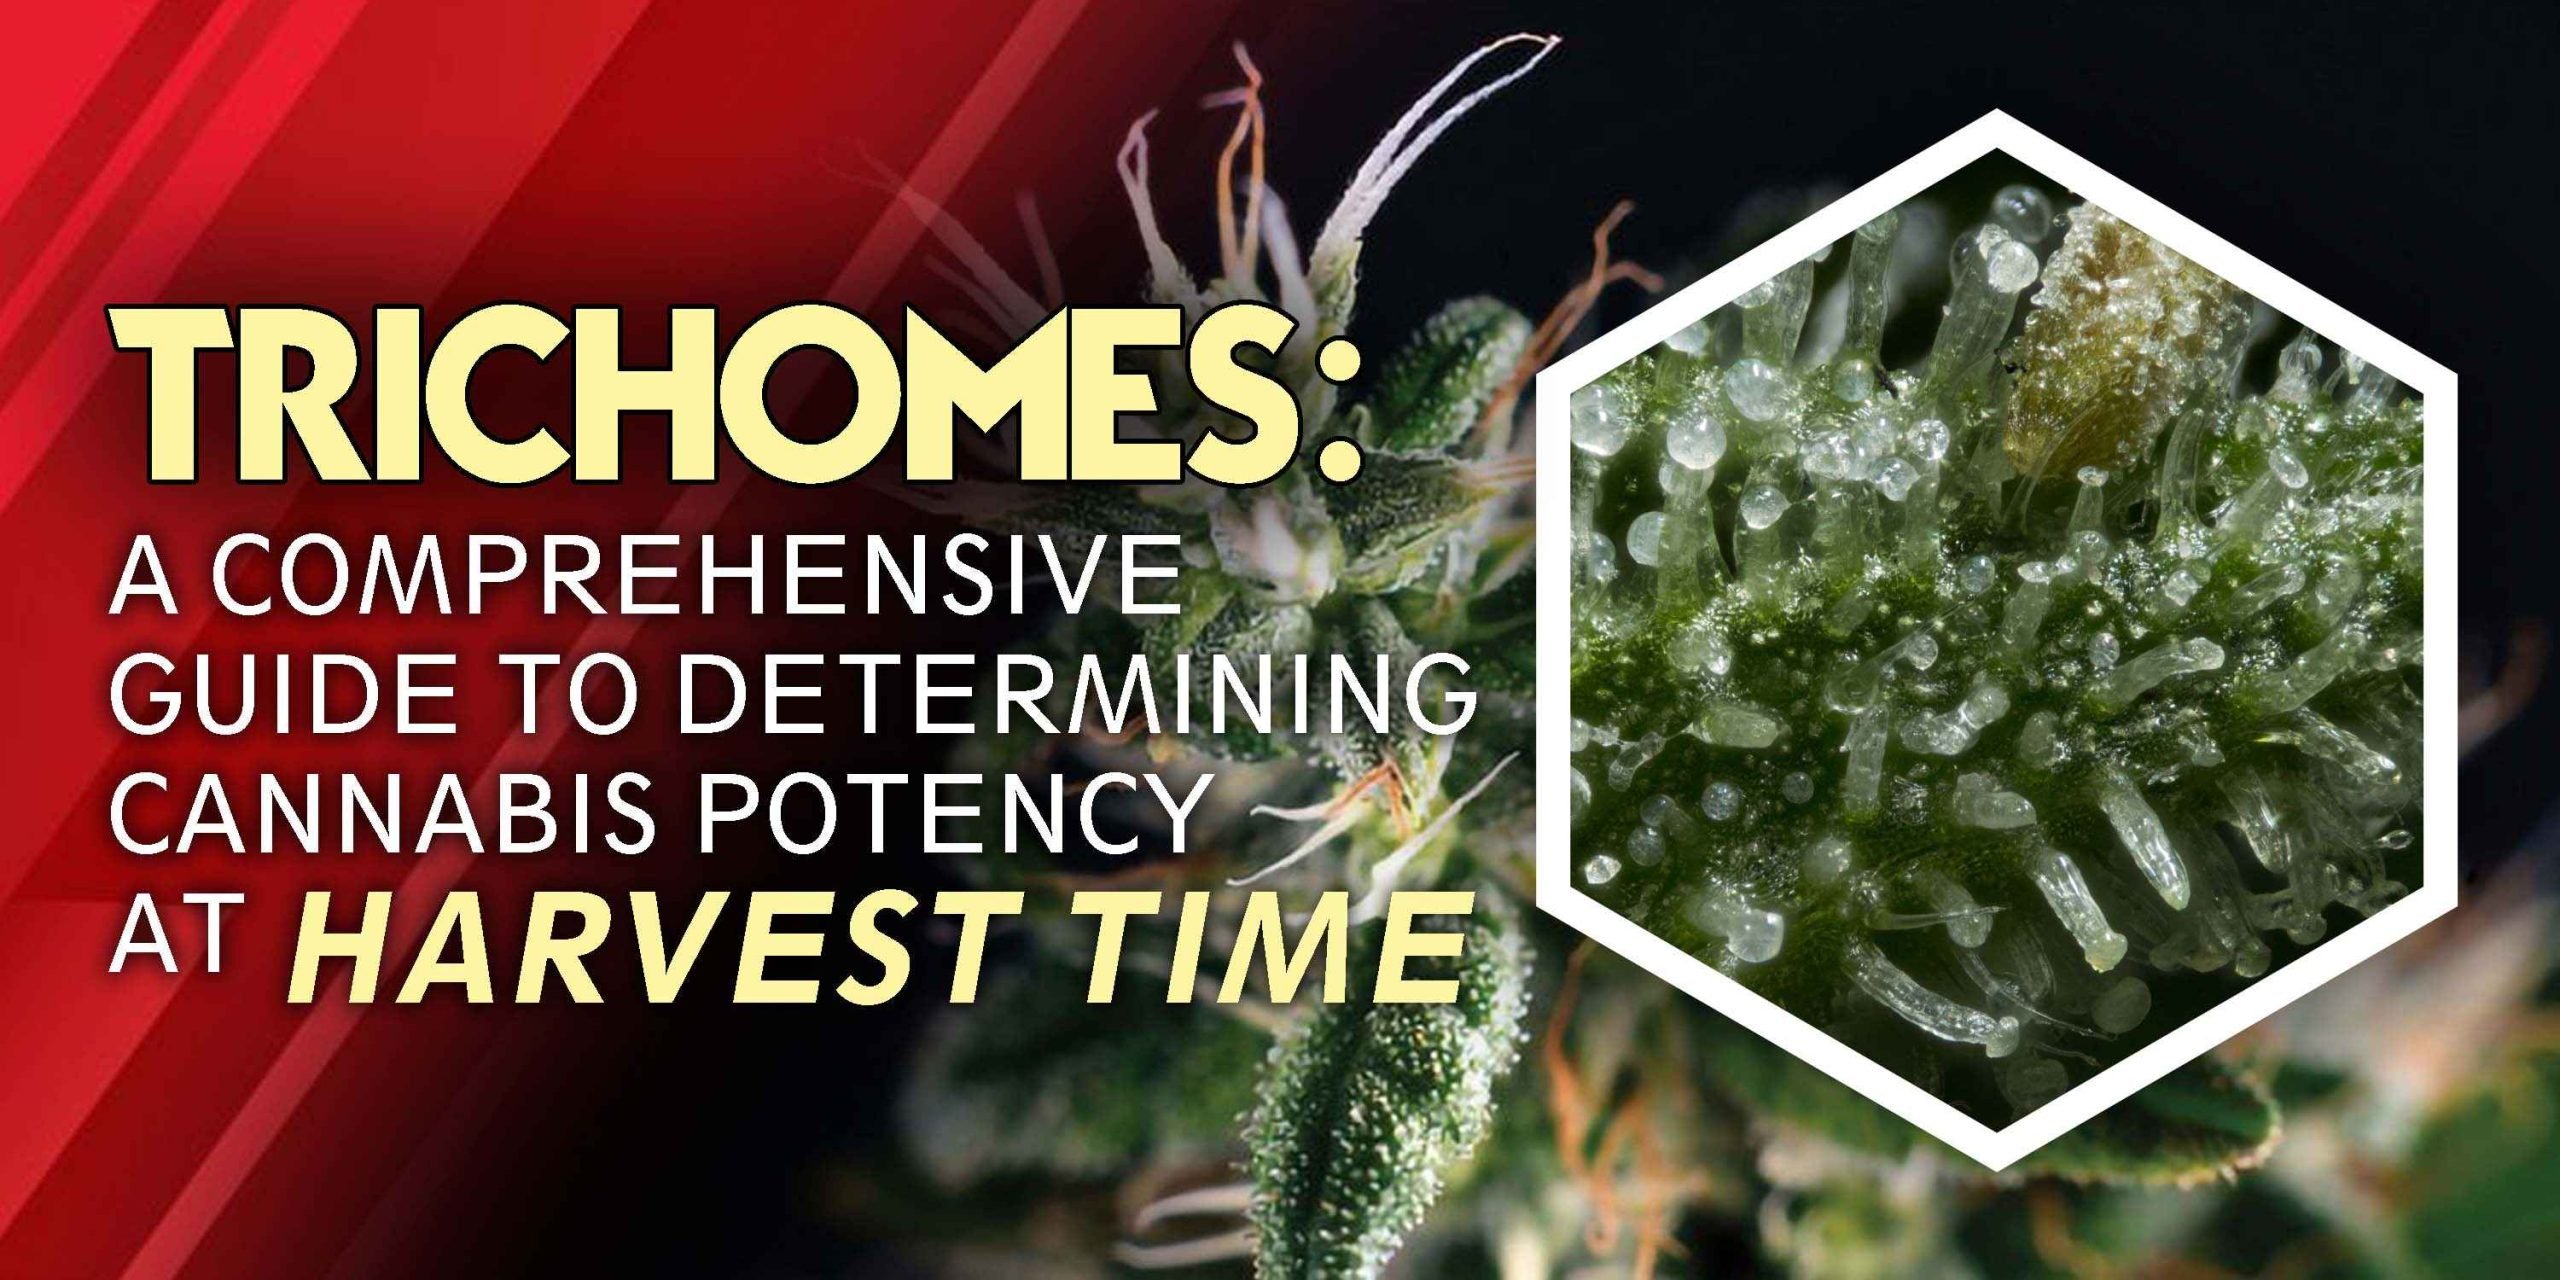 Freecompress Trichomes A Comprehensive Guide To Determining Cannabis Potency At Harvest Time Scaled, Crop King Seeds